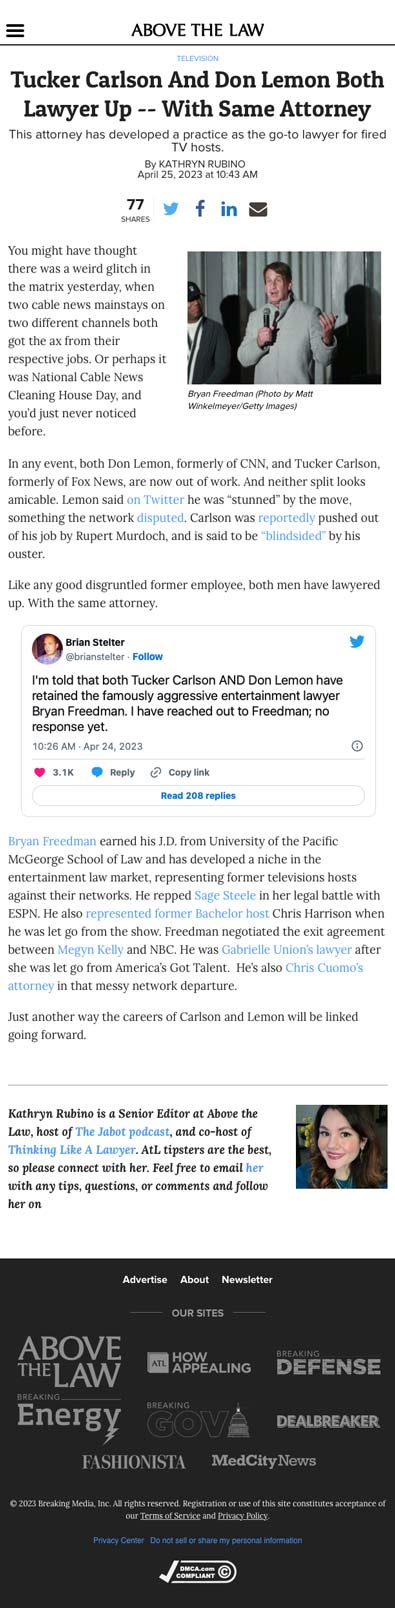 Tucker Carlson And Don Lemon Both Lawyer Up - With Same Attorney ...